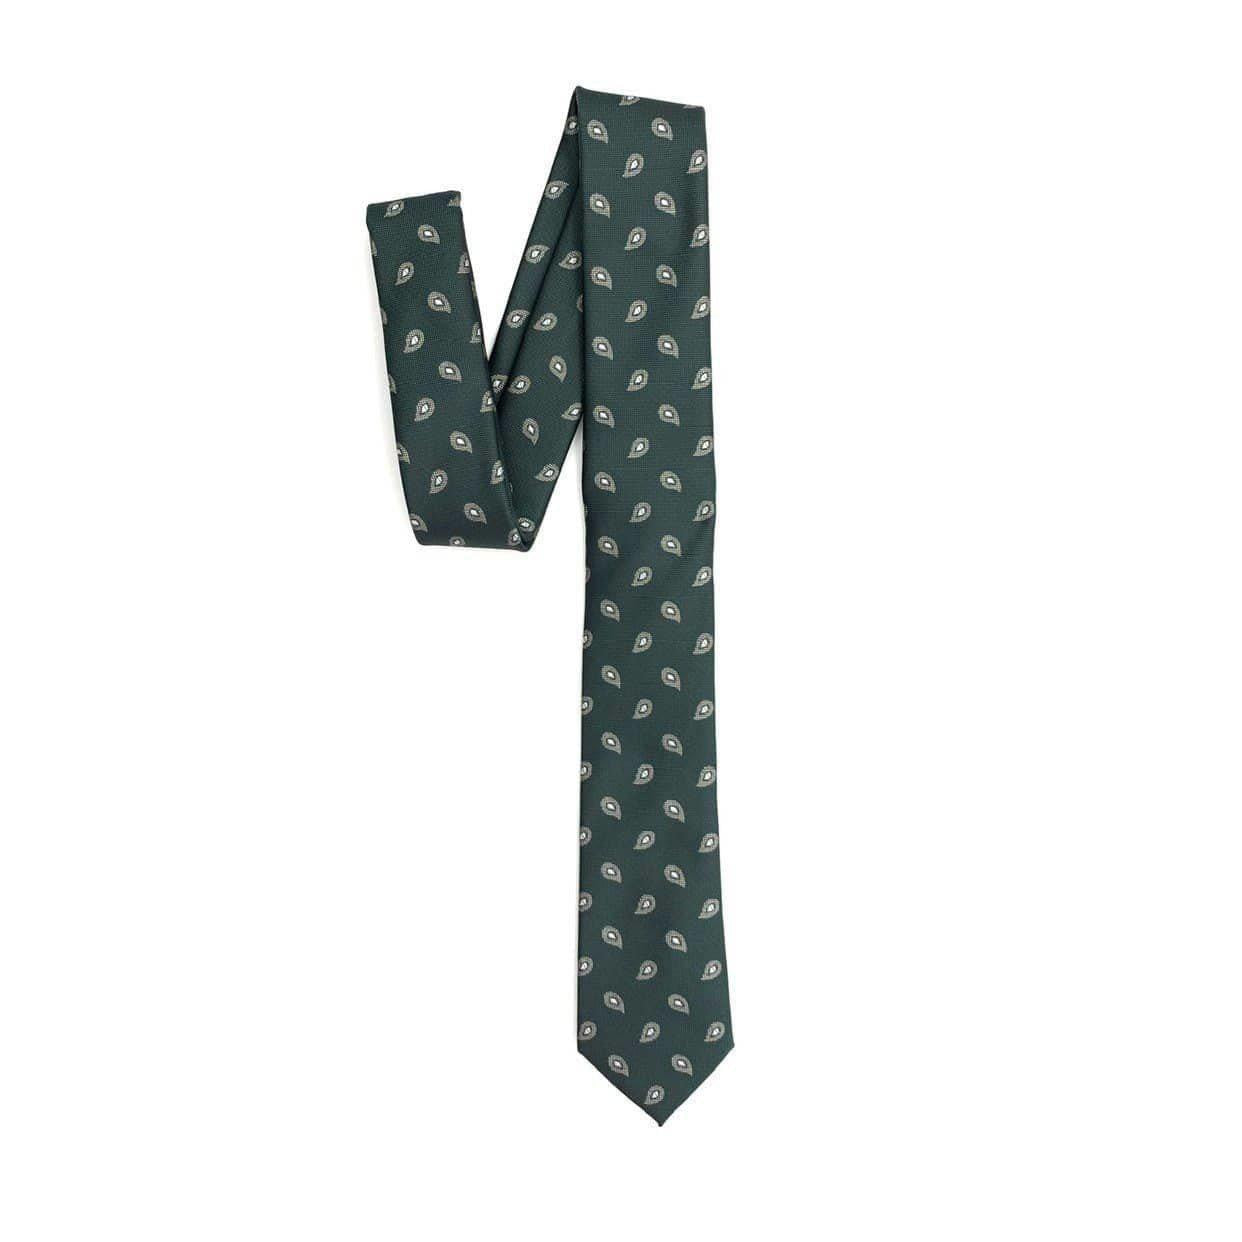 Green Floral Skinny Tie with Paisley HUNTER-Neckties-Green Floral Skinny Tie with Paisley HUNTER Men’s Floral Necktie for weddings and events, great for prom and anniversary gifts. Mens floral ties-Mytieshop. Skinny ties for weddings anniversaries. Father of bride. Groomsmen. Cool skinny neckties for men. Neckwear for prom, missions and fancy events. Gift ideas for men. Anniversaries ideas. Wedding aesthetics. Flower ties. Dry flower ties.